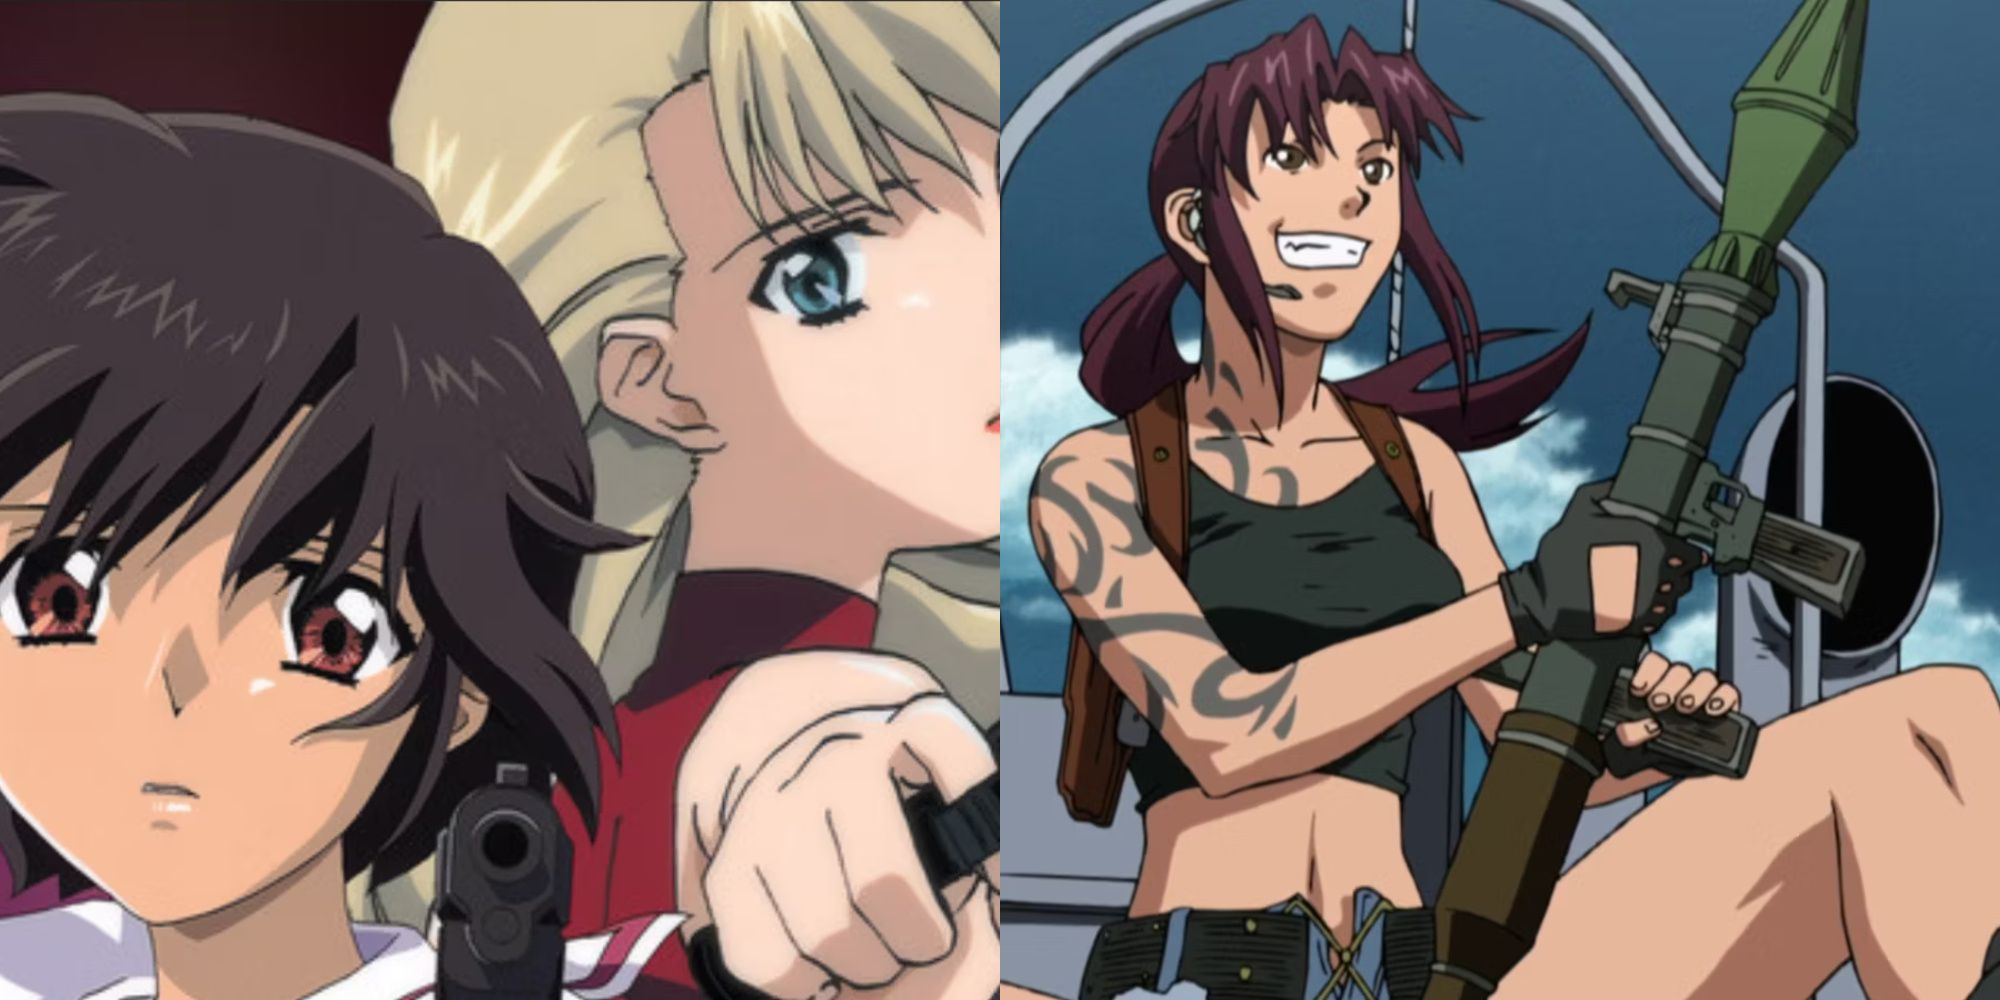 Girls with Guns Anime Feature Image